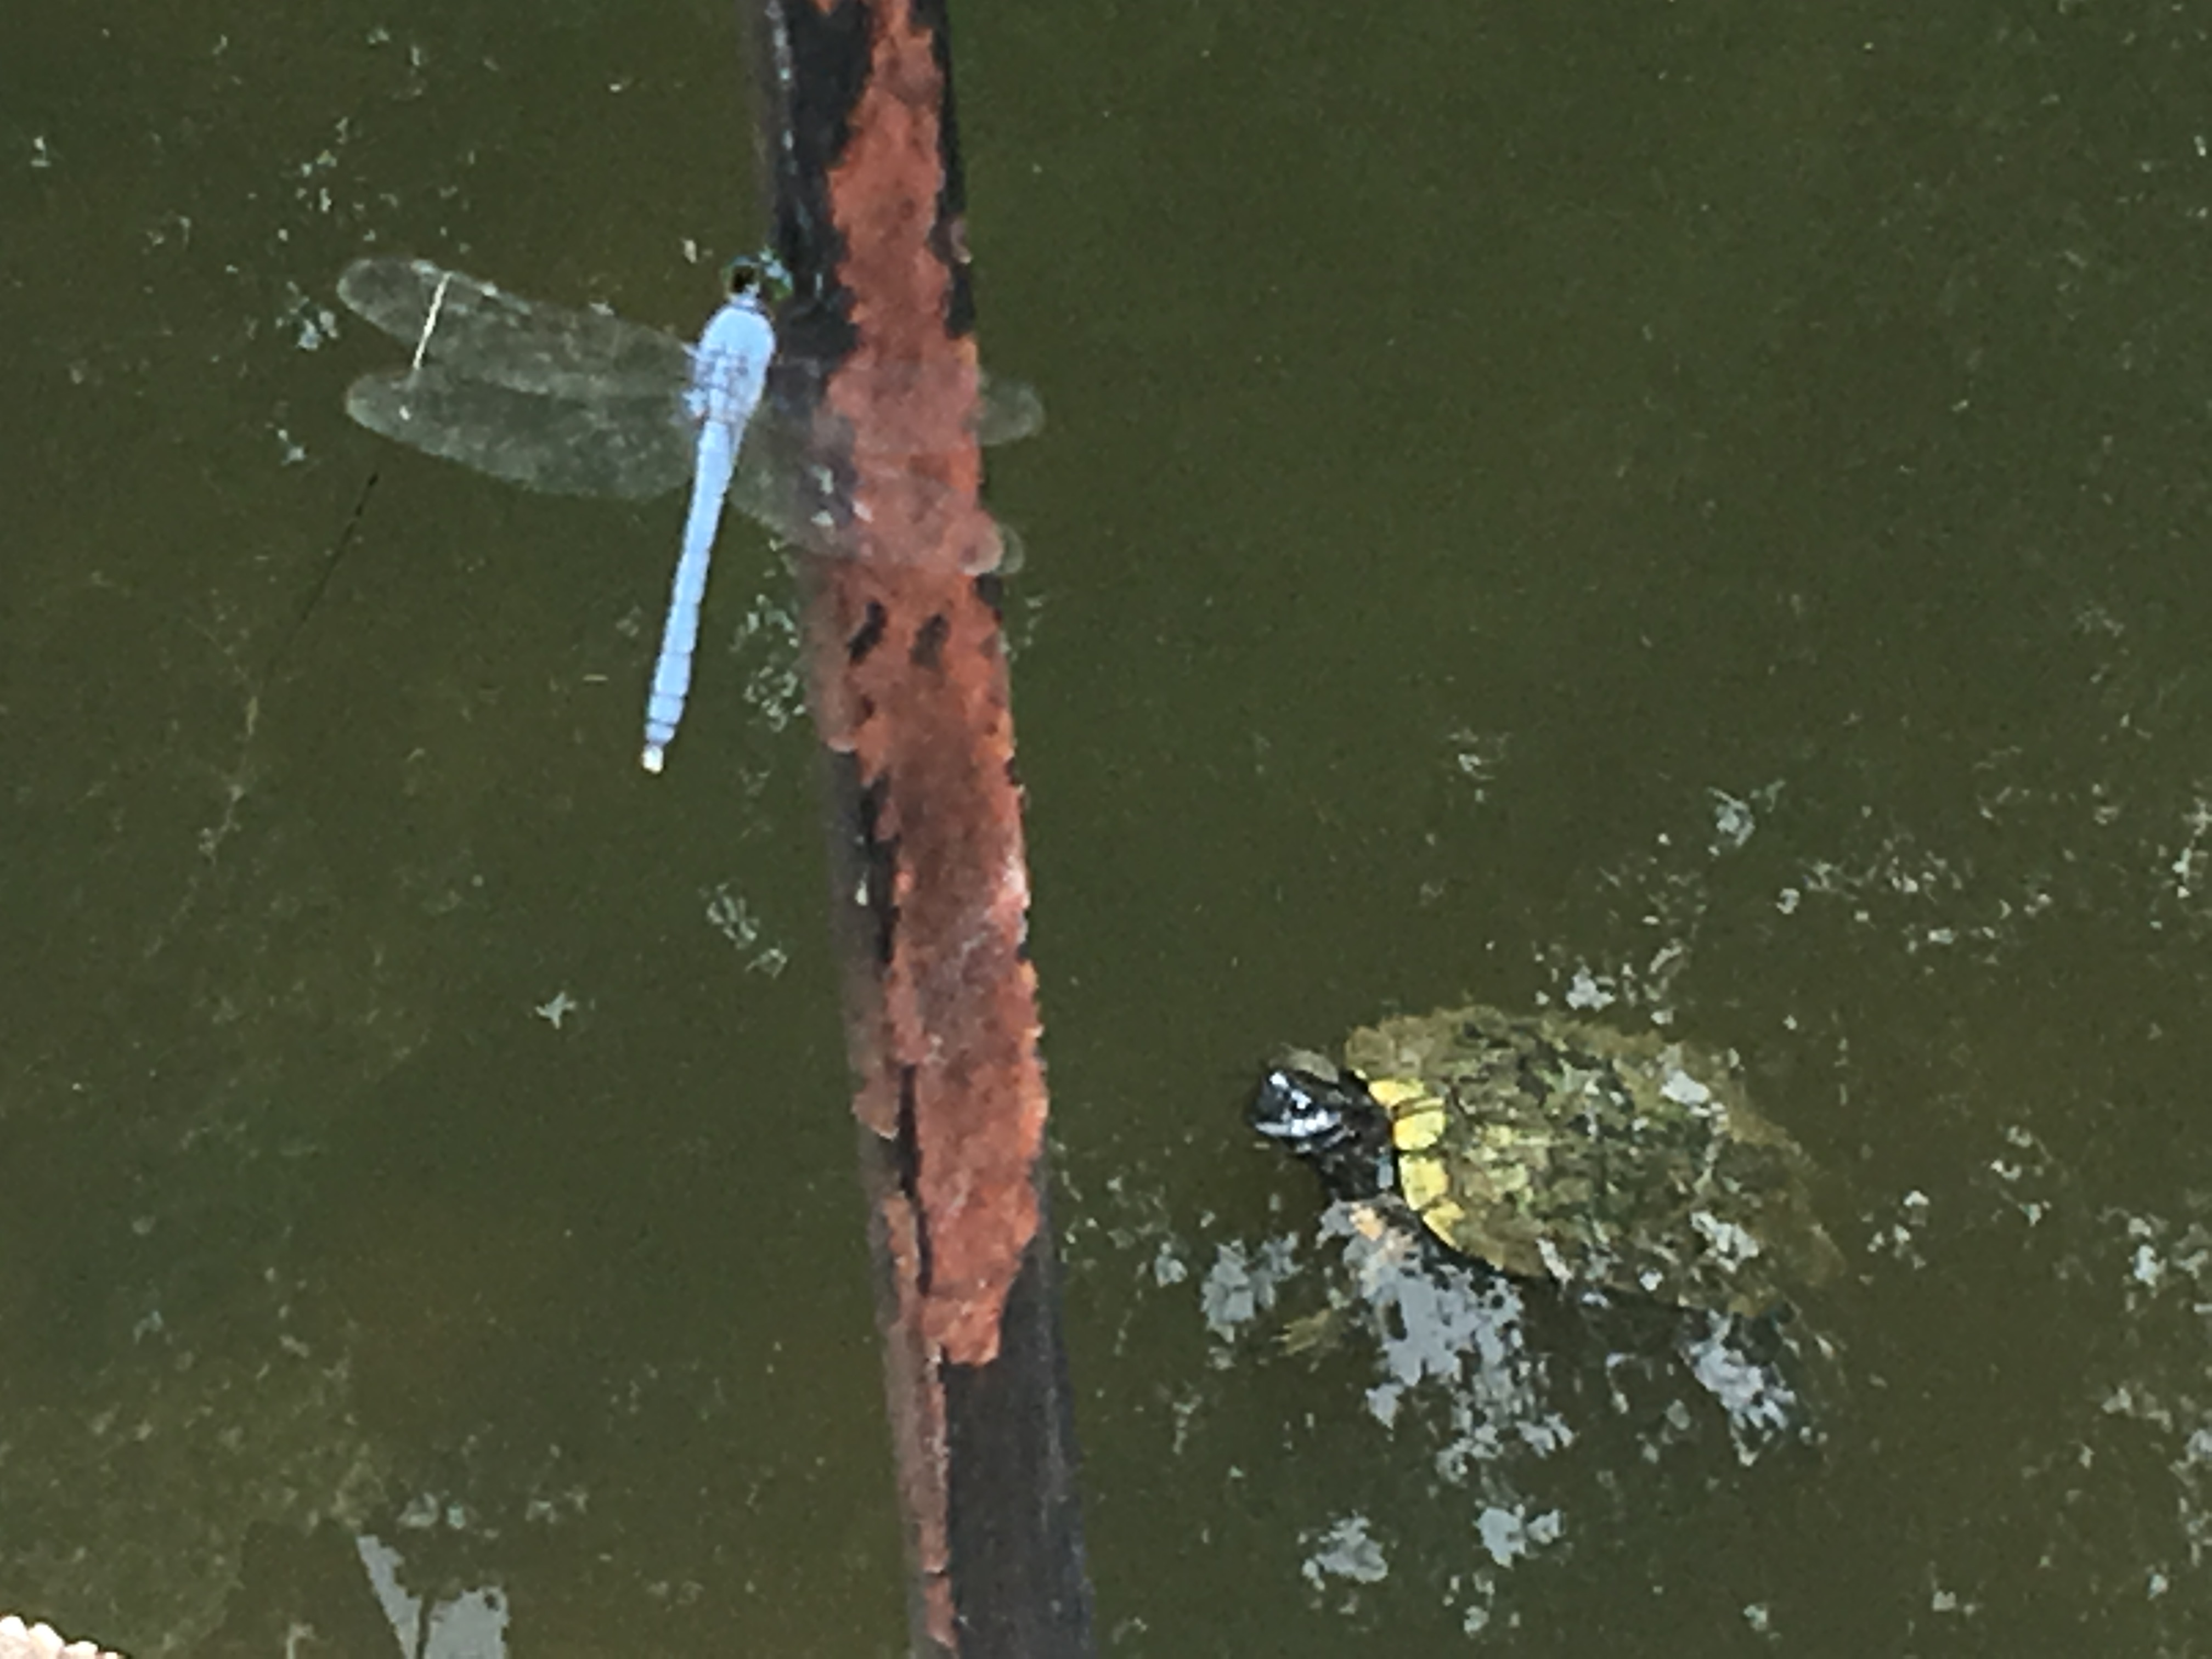 Turtle and Dragonfly-Raleigh Eastgate Park, July 13, 2019